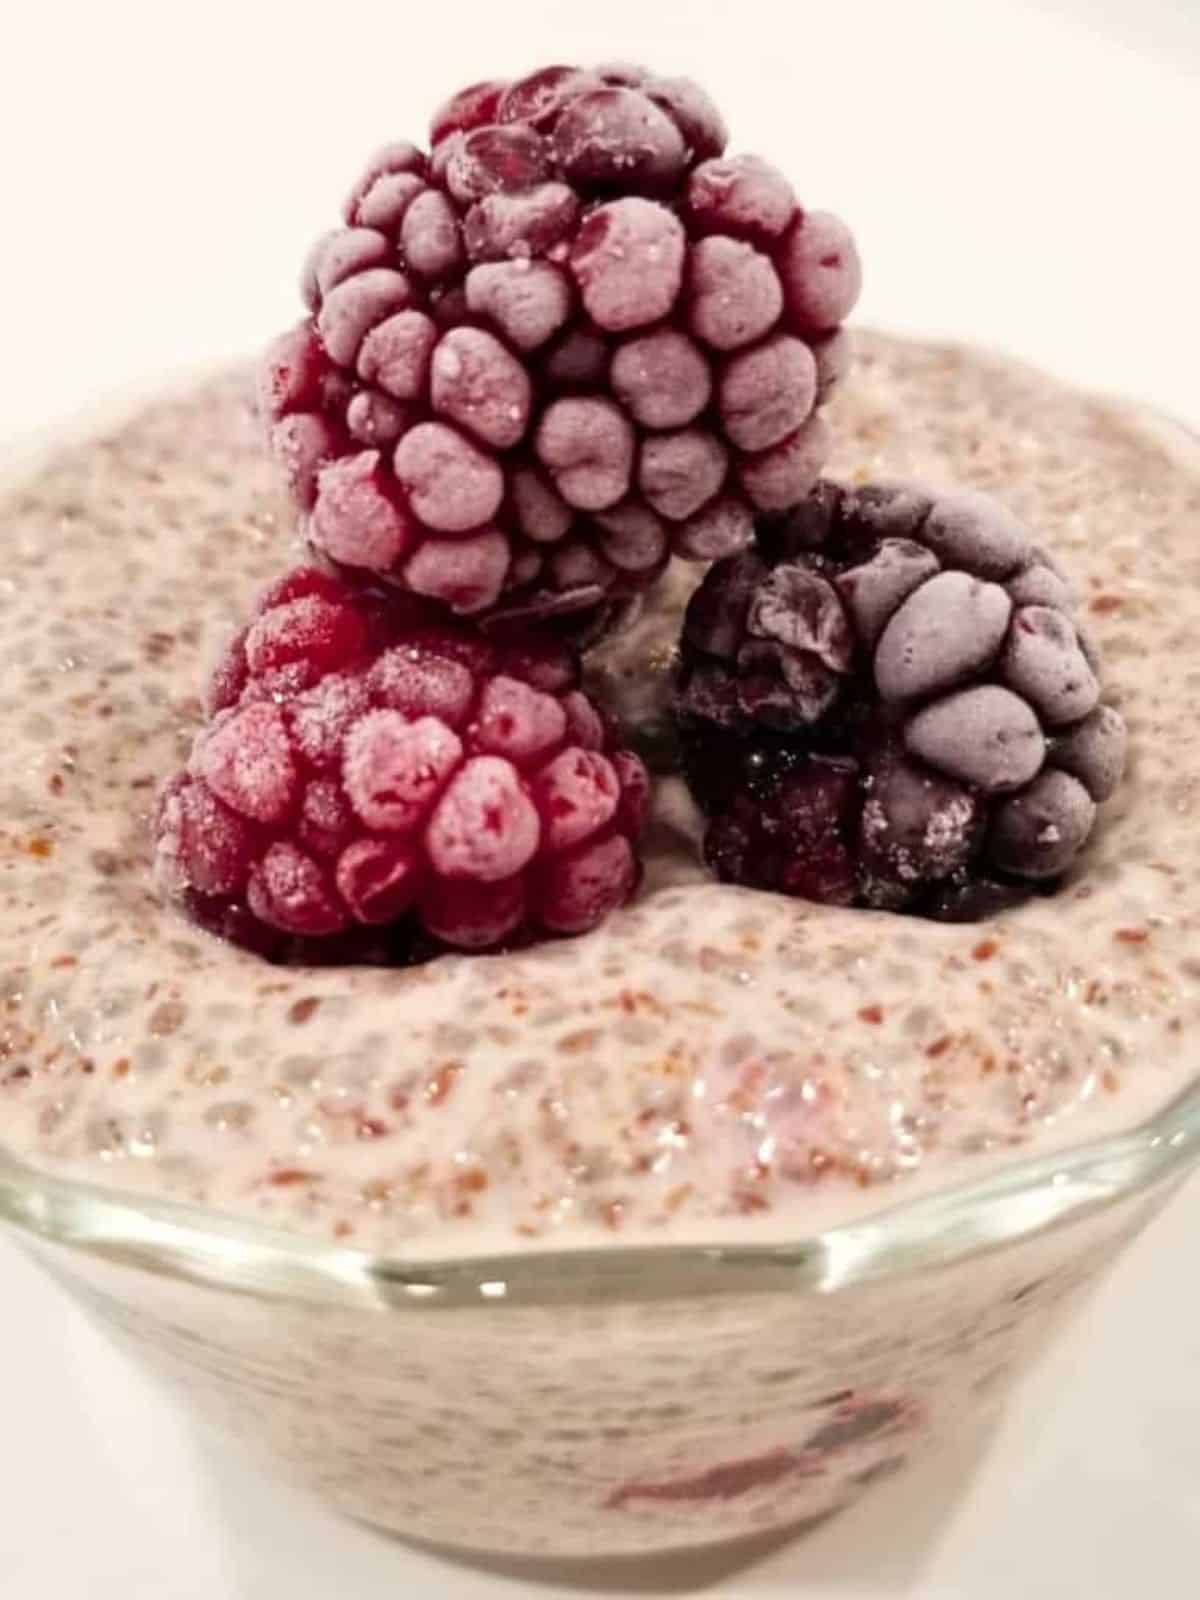 chia and flax seed pudding topped with fresh berries.